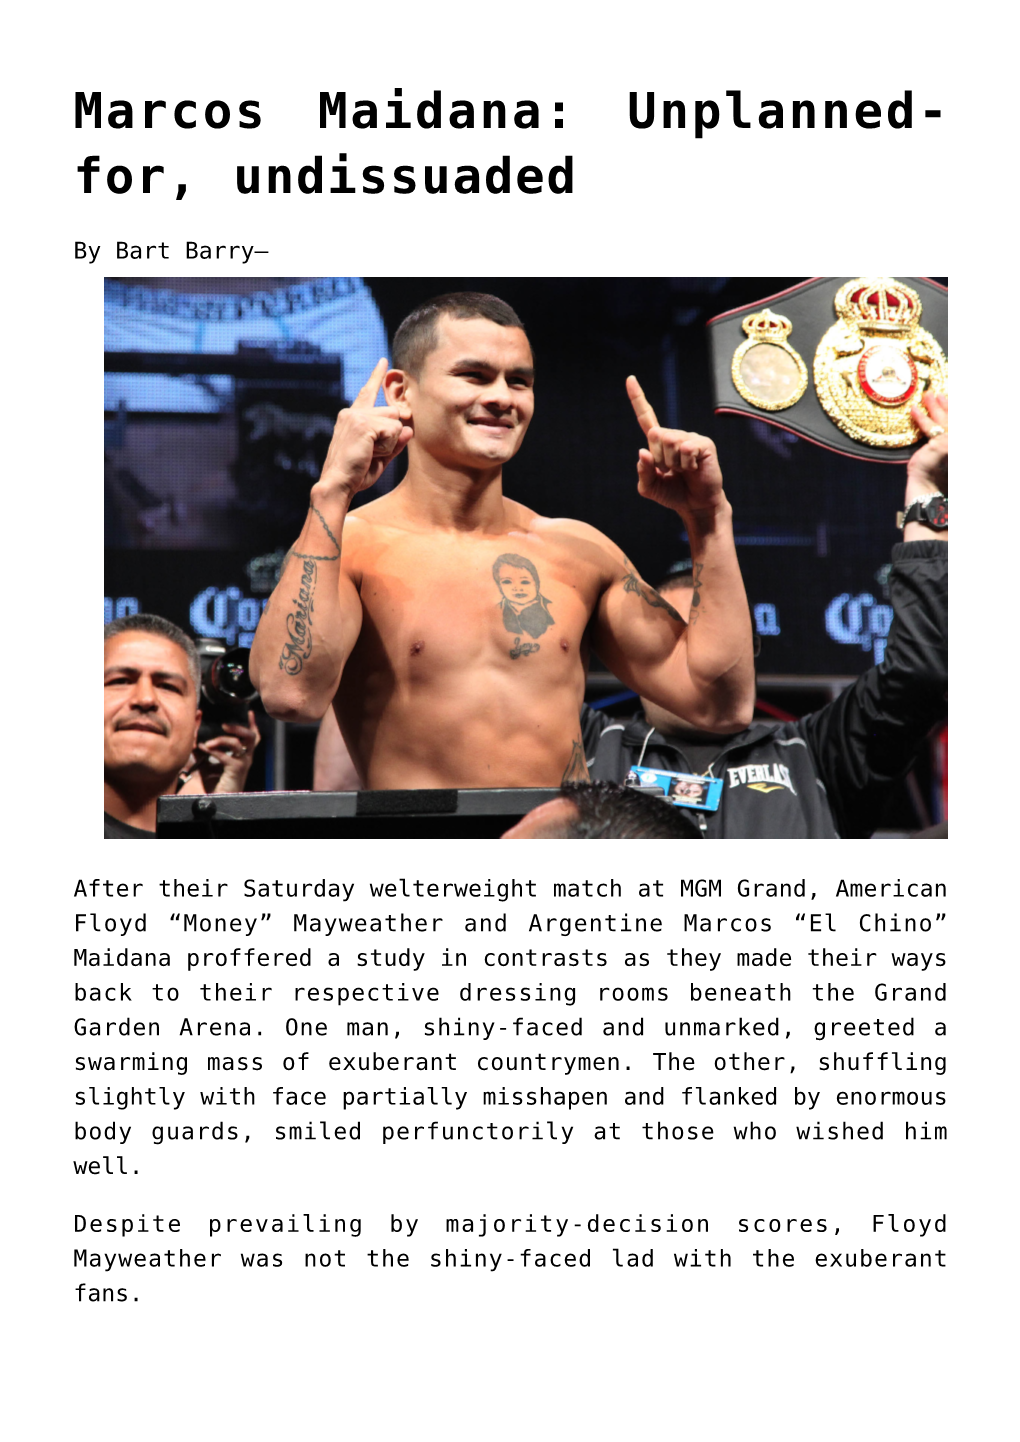 Marcos Maidana: Unplanned-For, Undissuaded